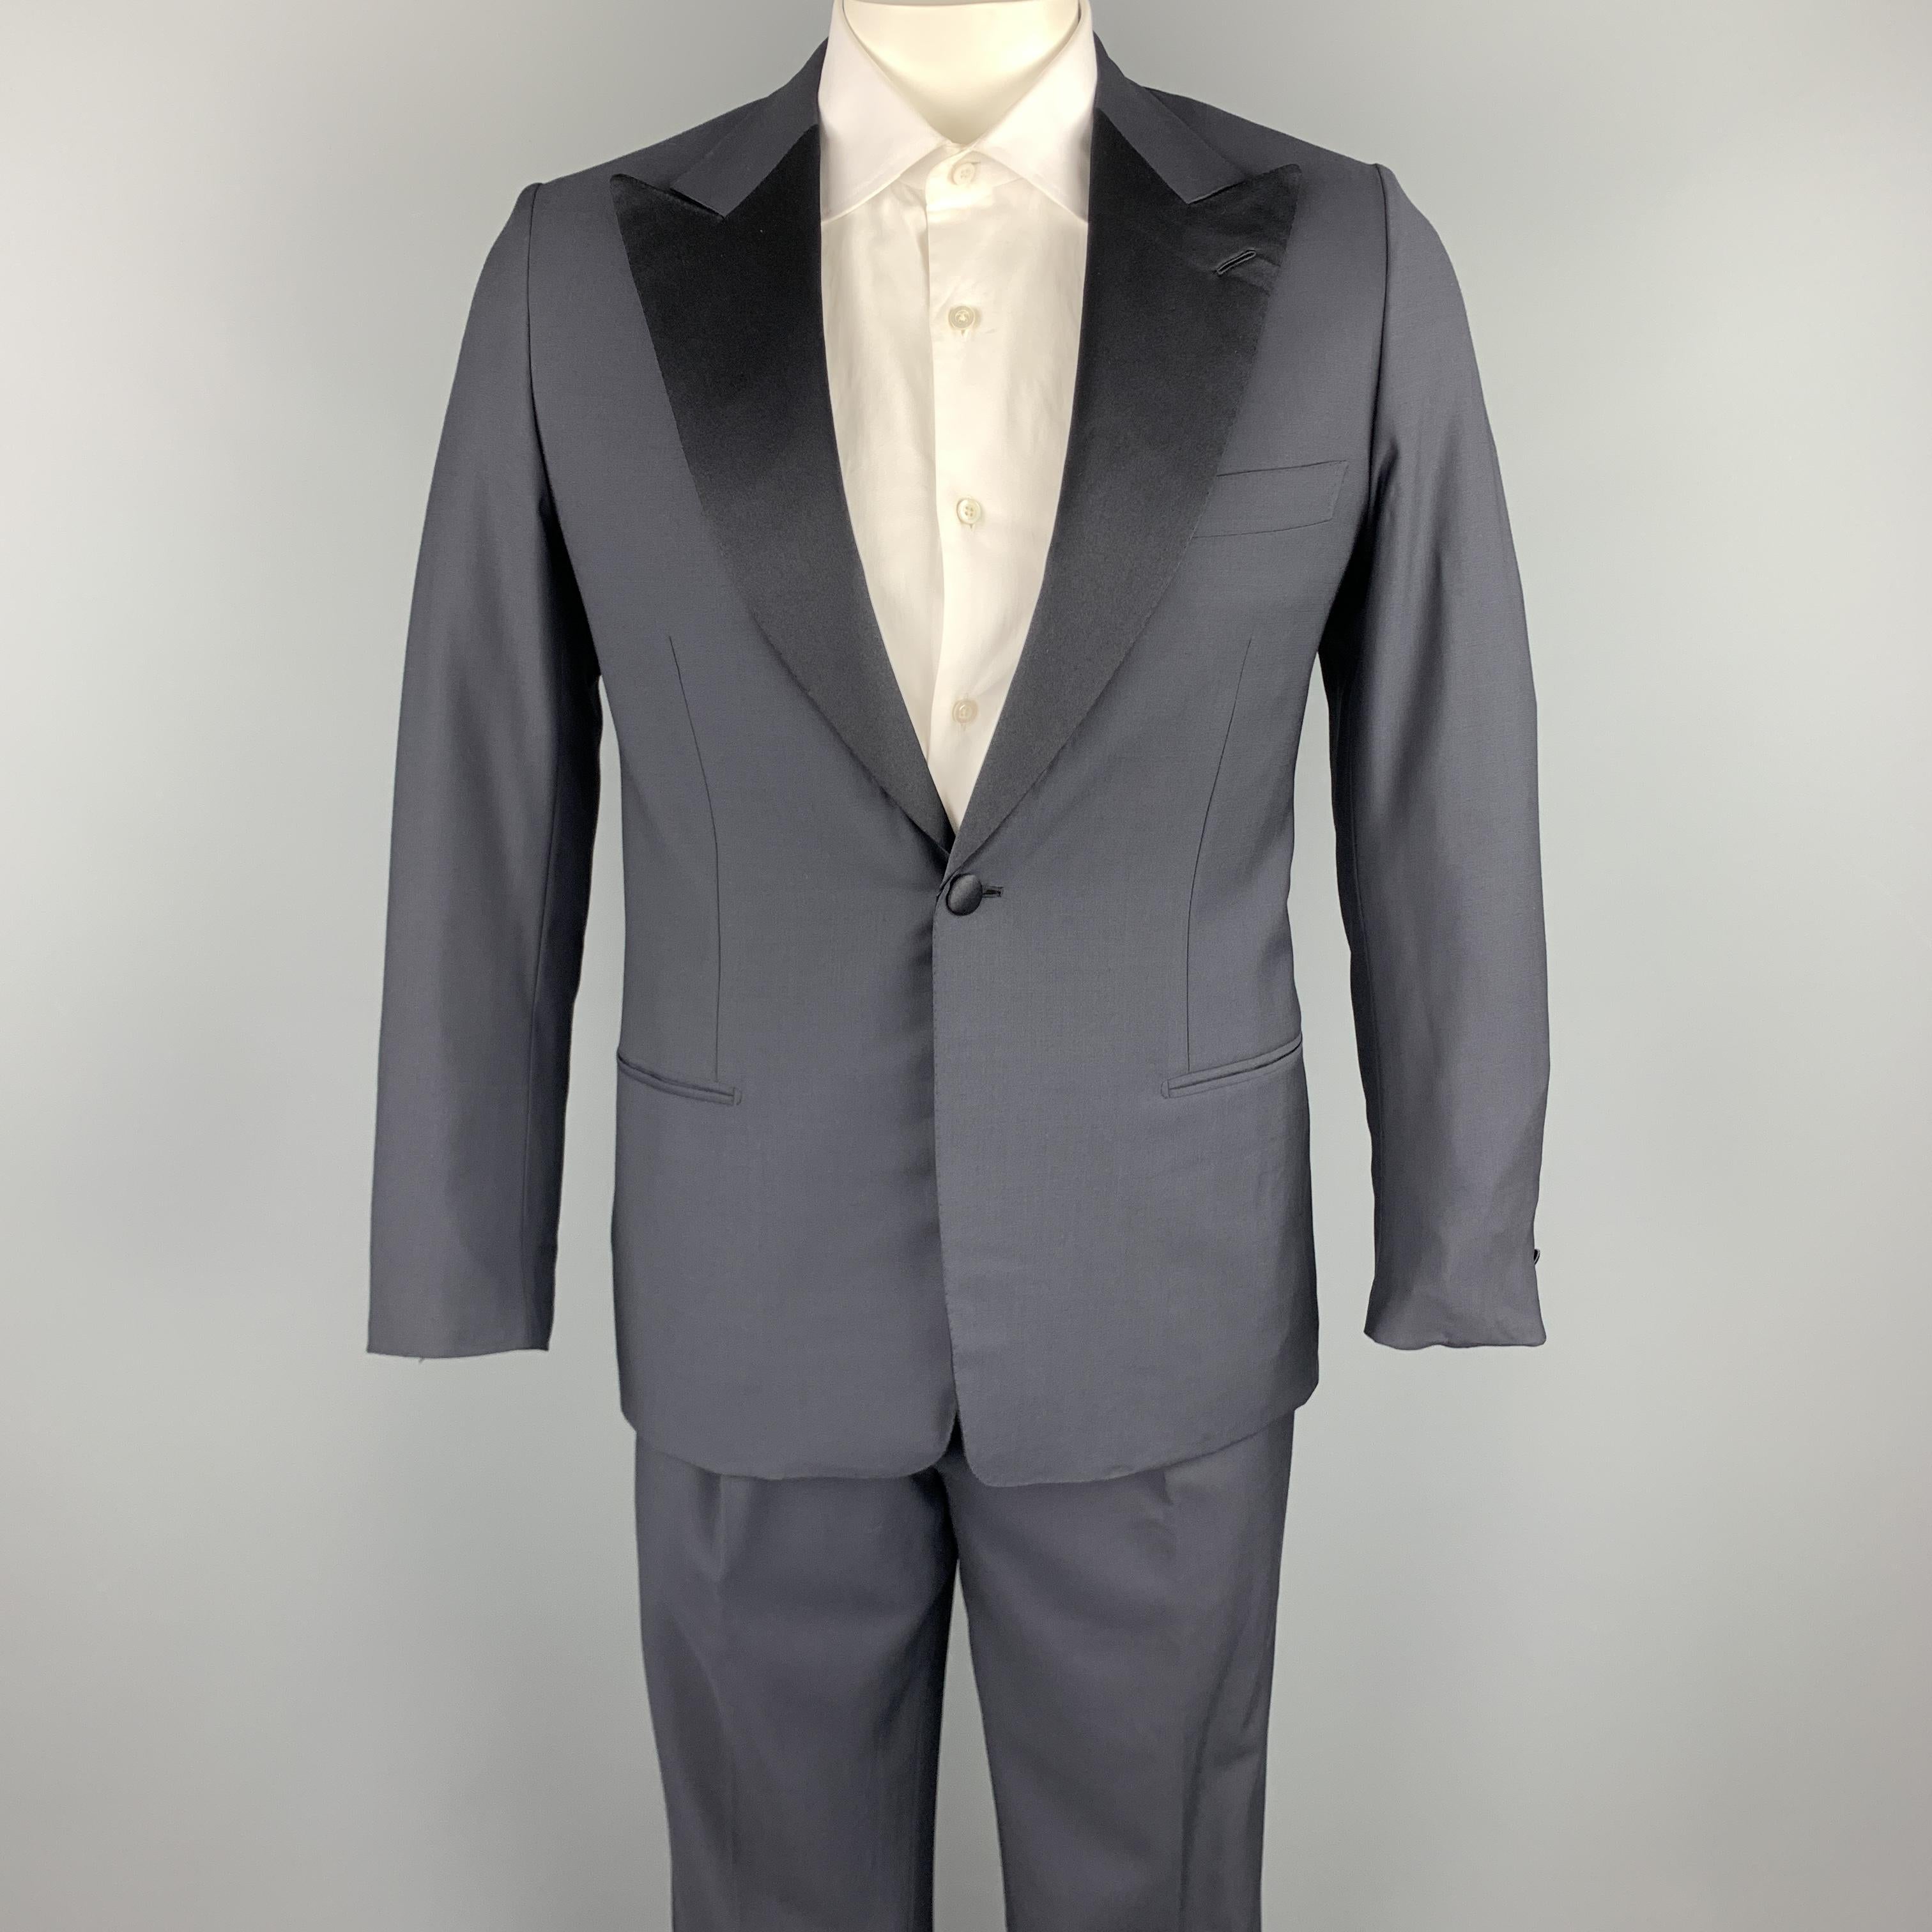 BRIONI x WILKES BASHFORD tuxedo suit comes in a navy wool and includes a single breasted, single button sport coat with a peak lapel, monogram print liner, and matching pleated front trousers. Made in Italy.

Excellent Pre-Owned Condition.
Marked: